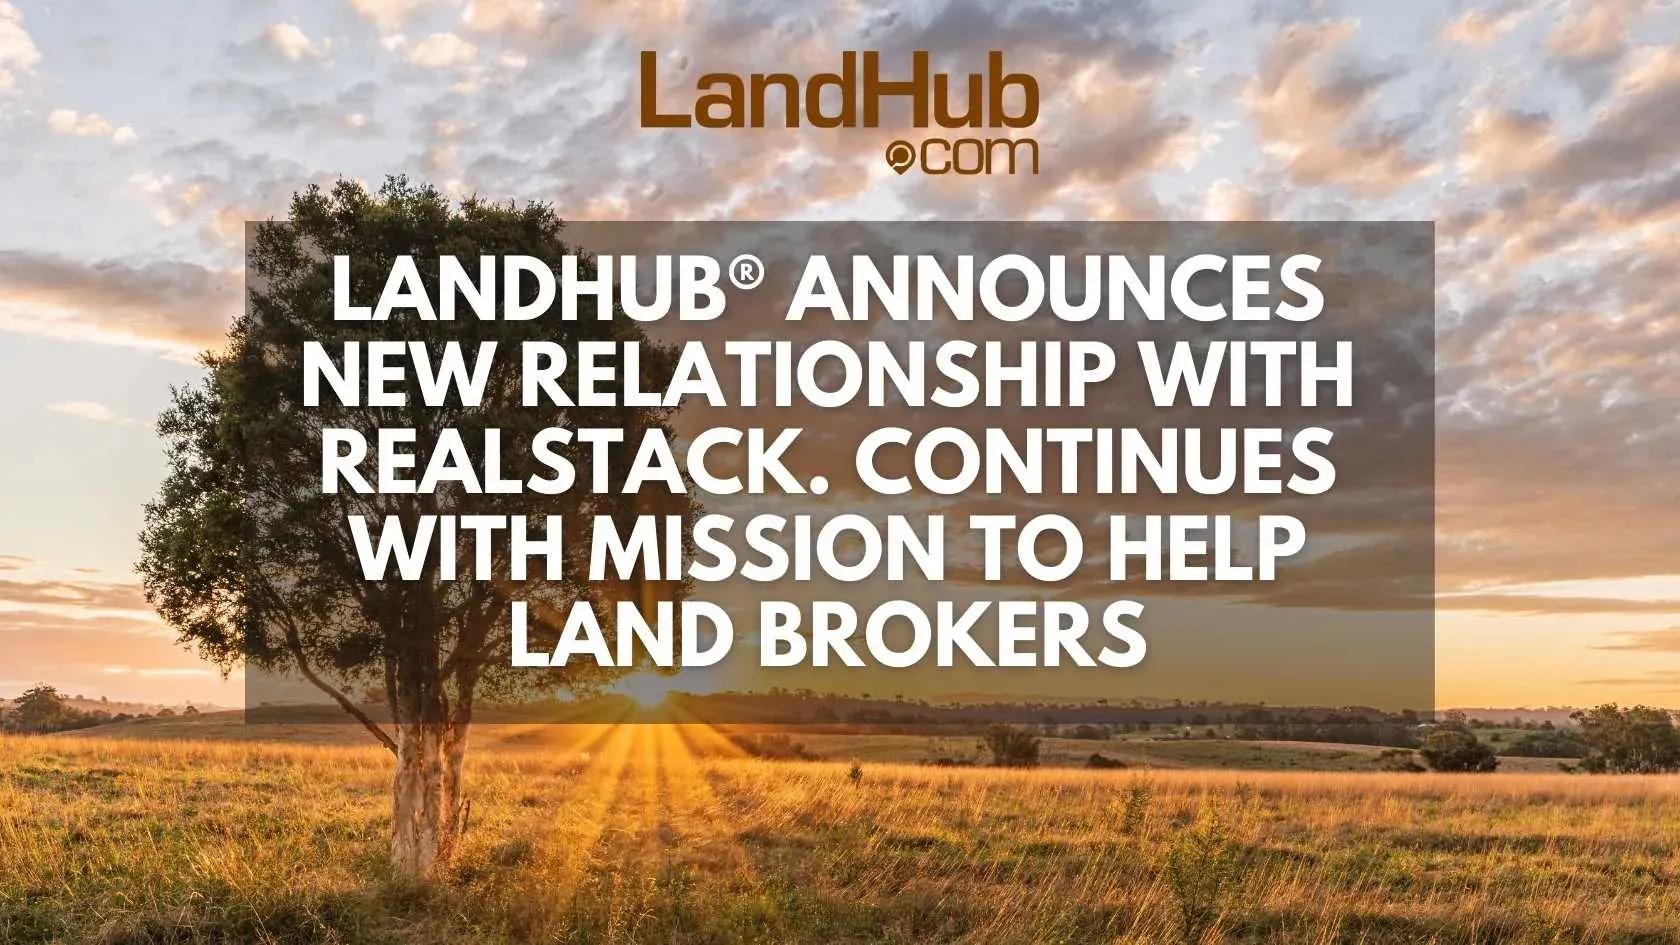 landhub® announces new relationship with realstack. continues with mission to help land brokers